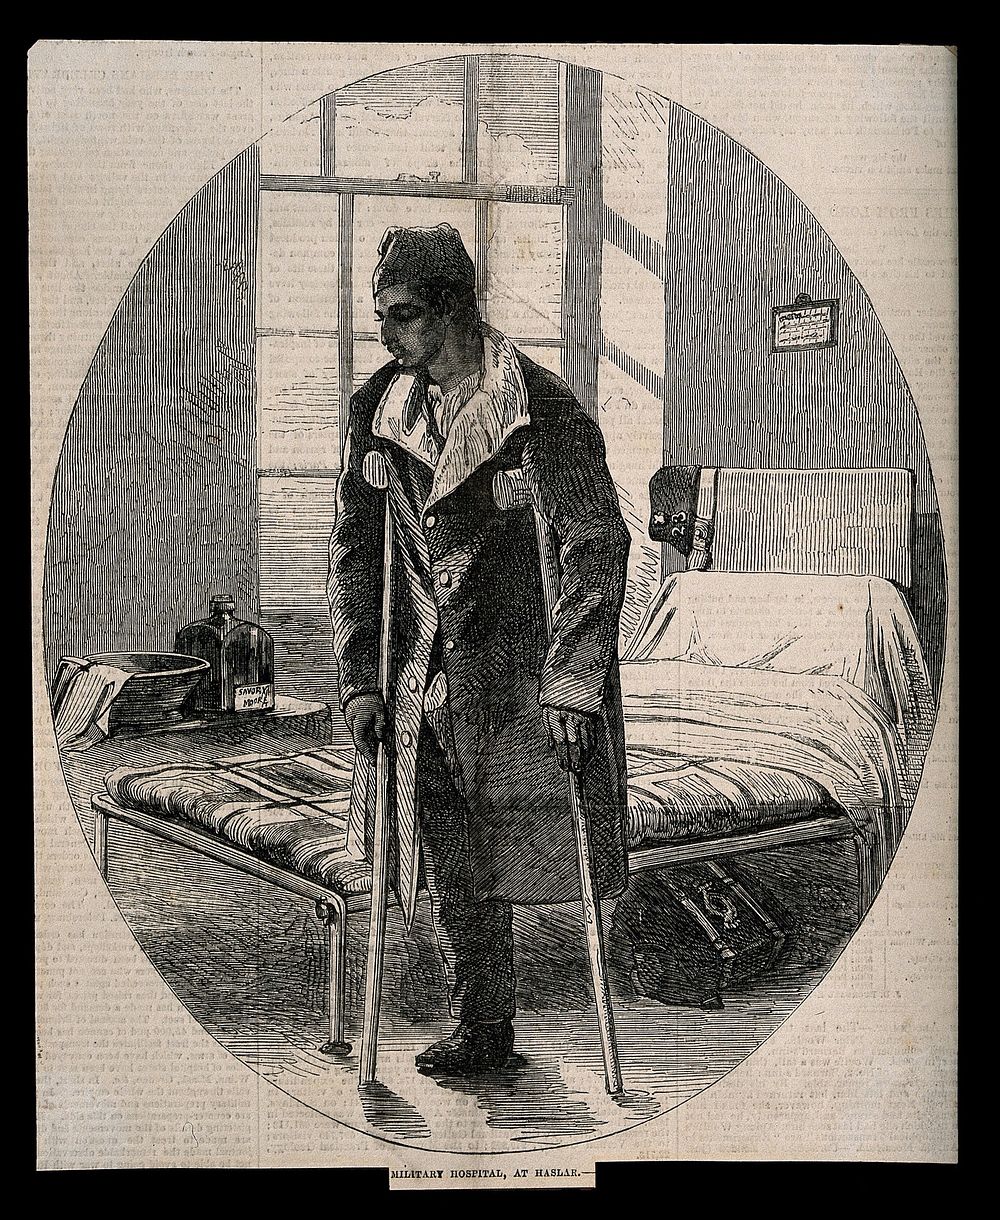 Royal Hospital Haslar: a soldier on crutches with an amputated leg, wounded after the Battle of the Alma. Wood engraving…